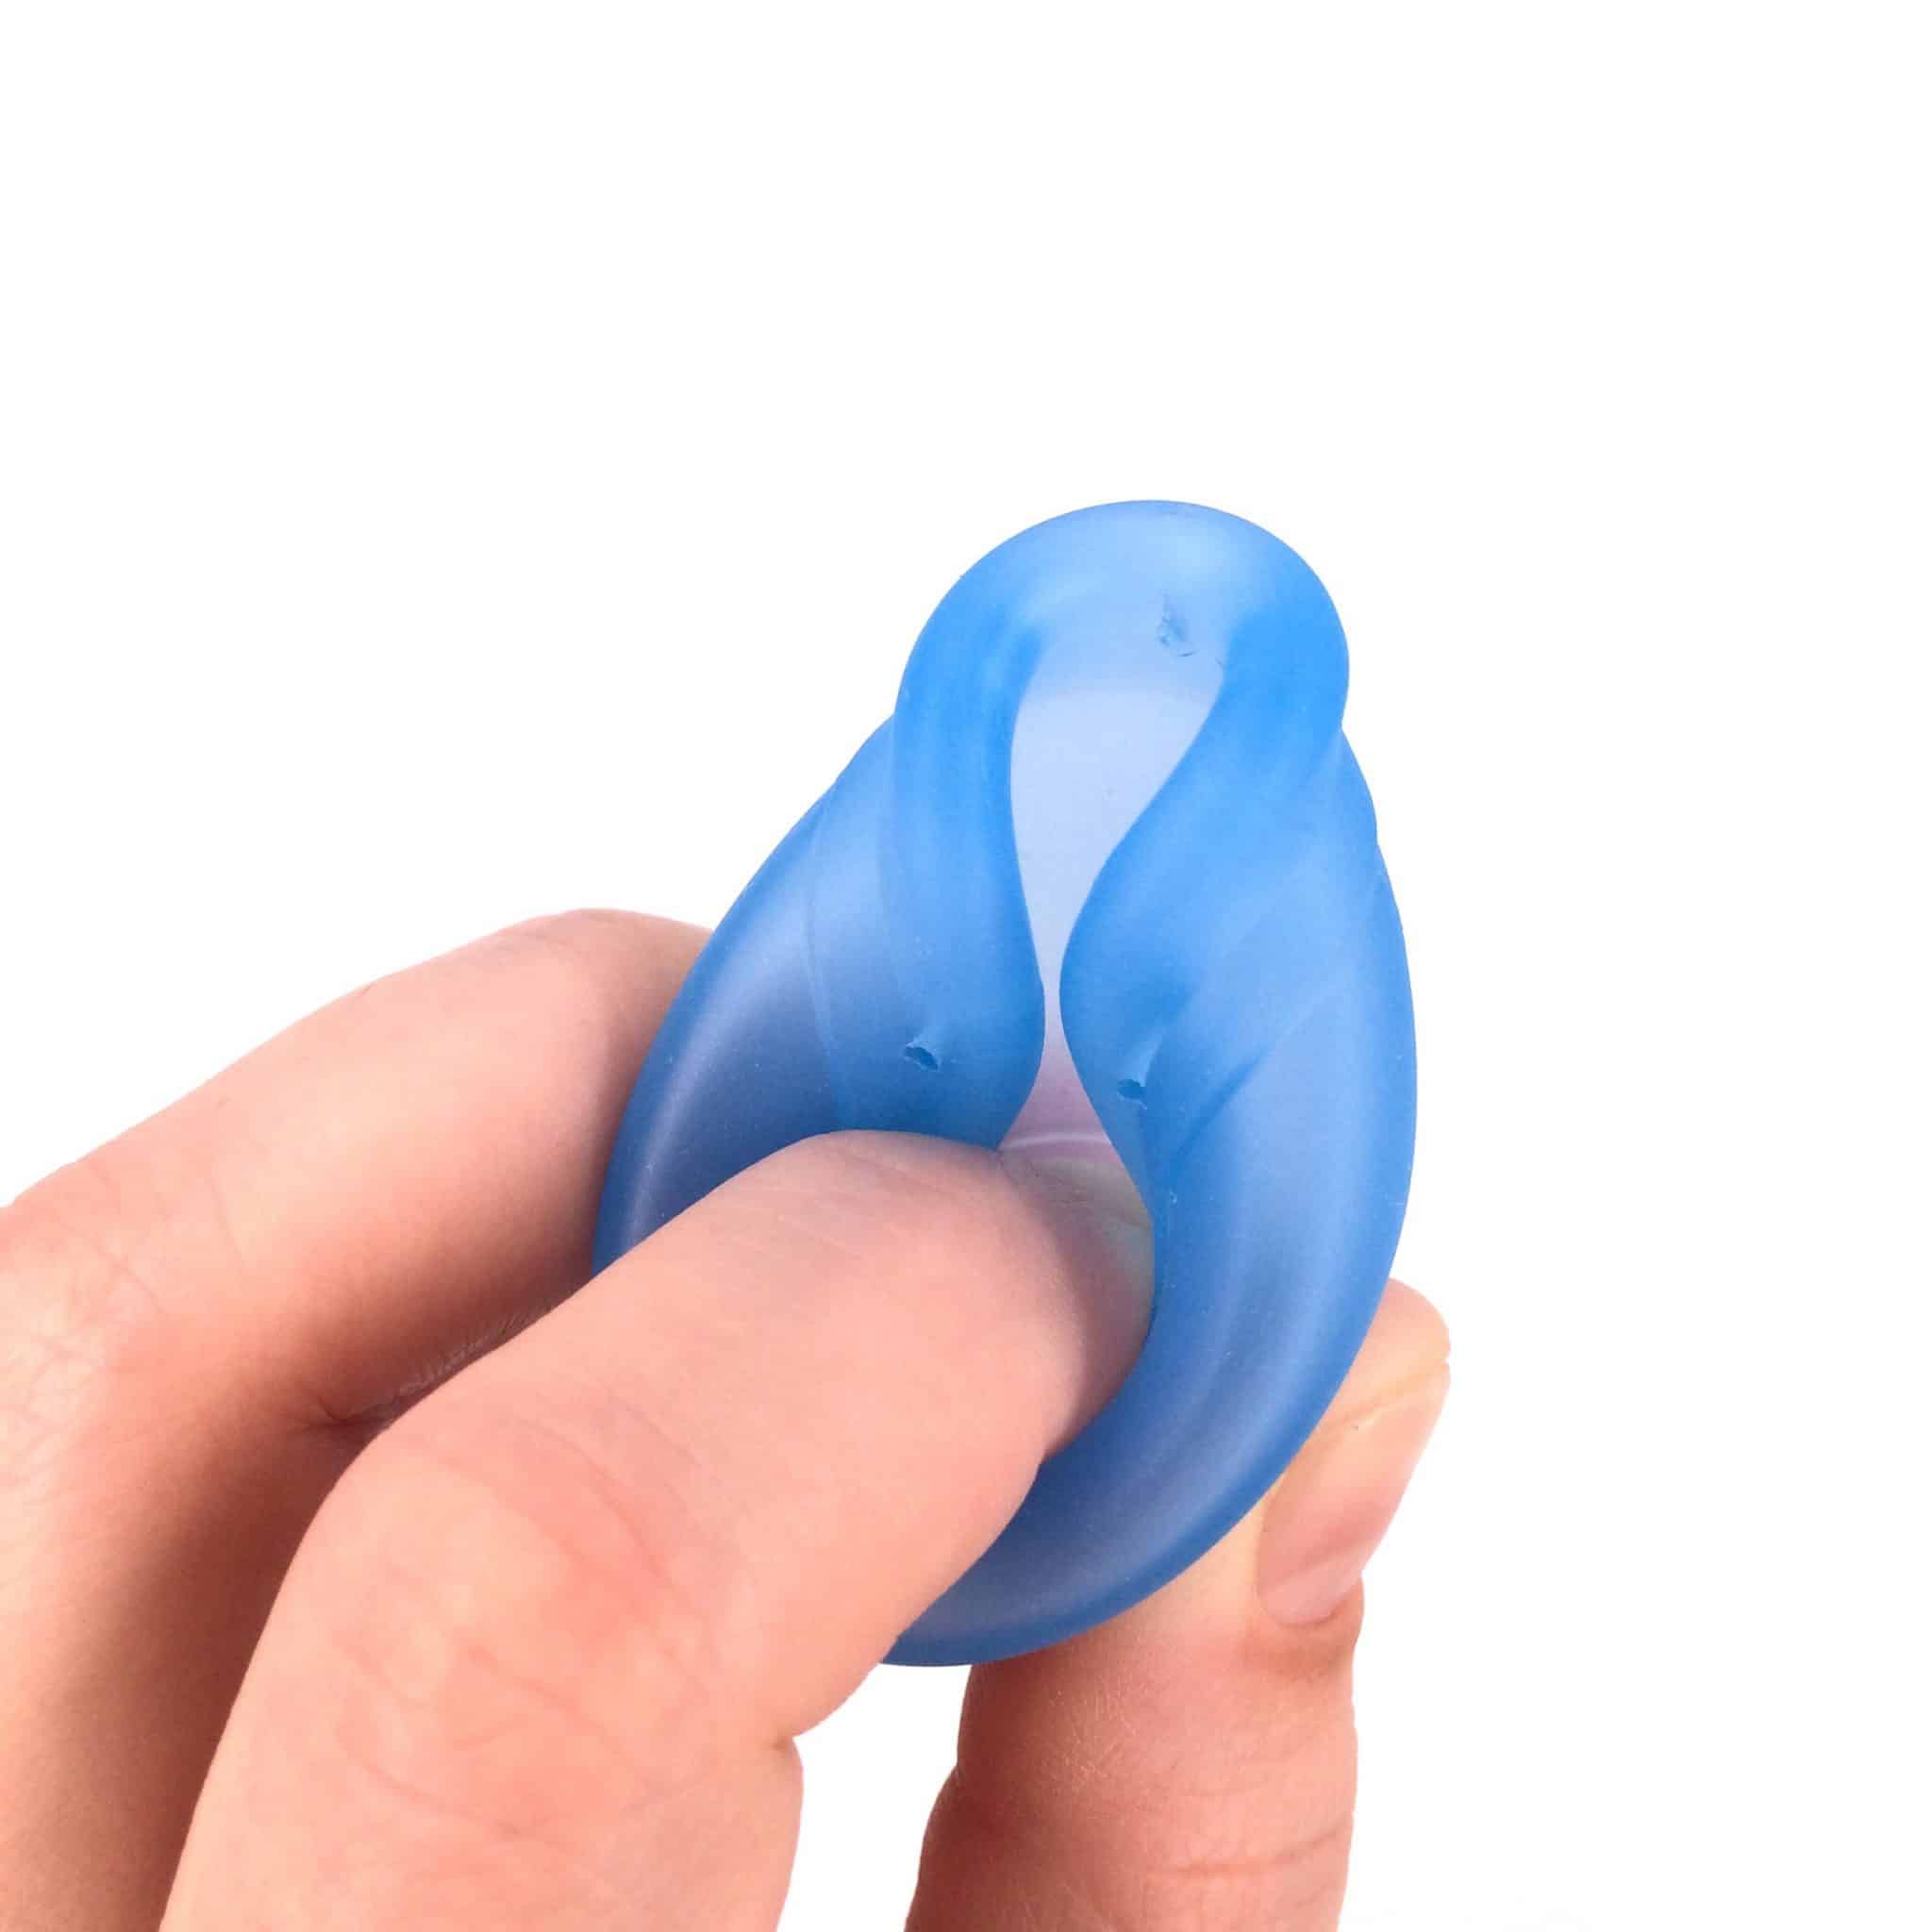 Menstrual collector folds: 15 shapes for you to choose your favorite